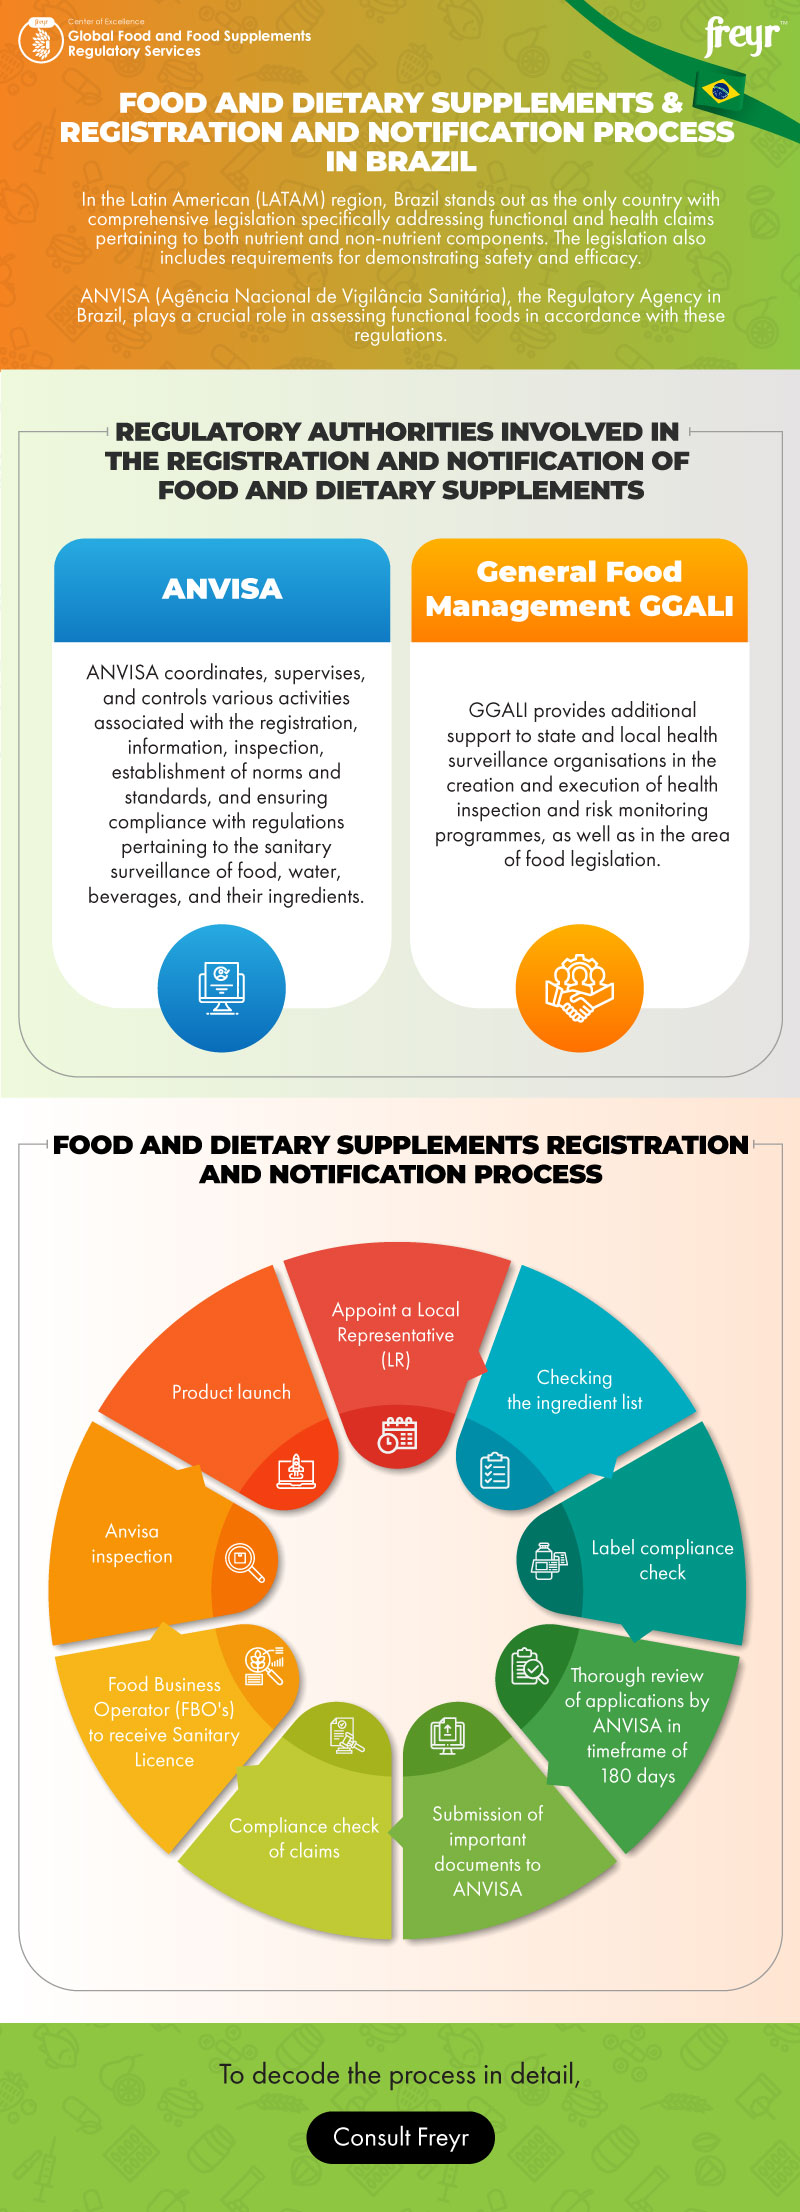 Notification Process for Food Supplements in Italy: A Quick Guide